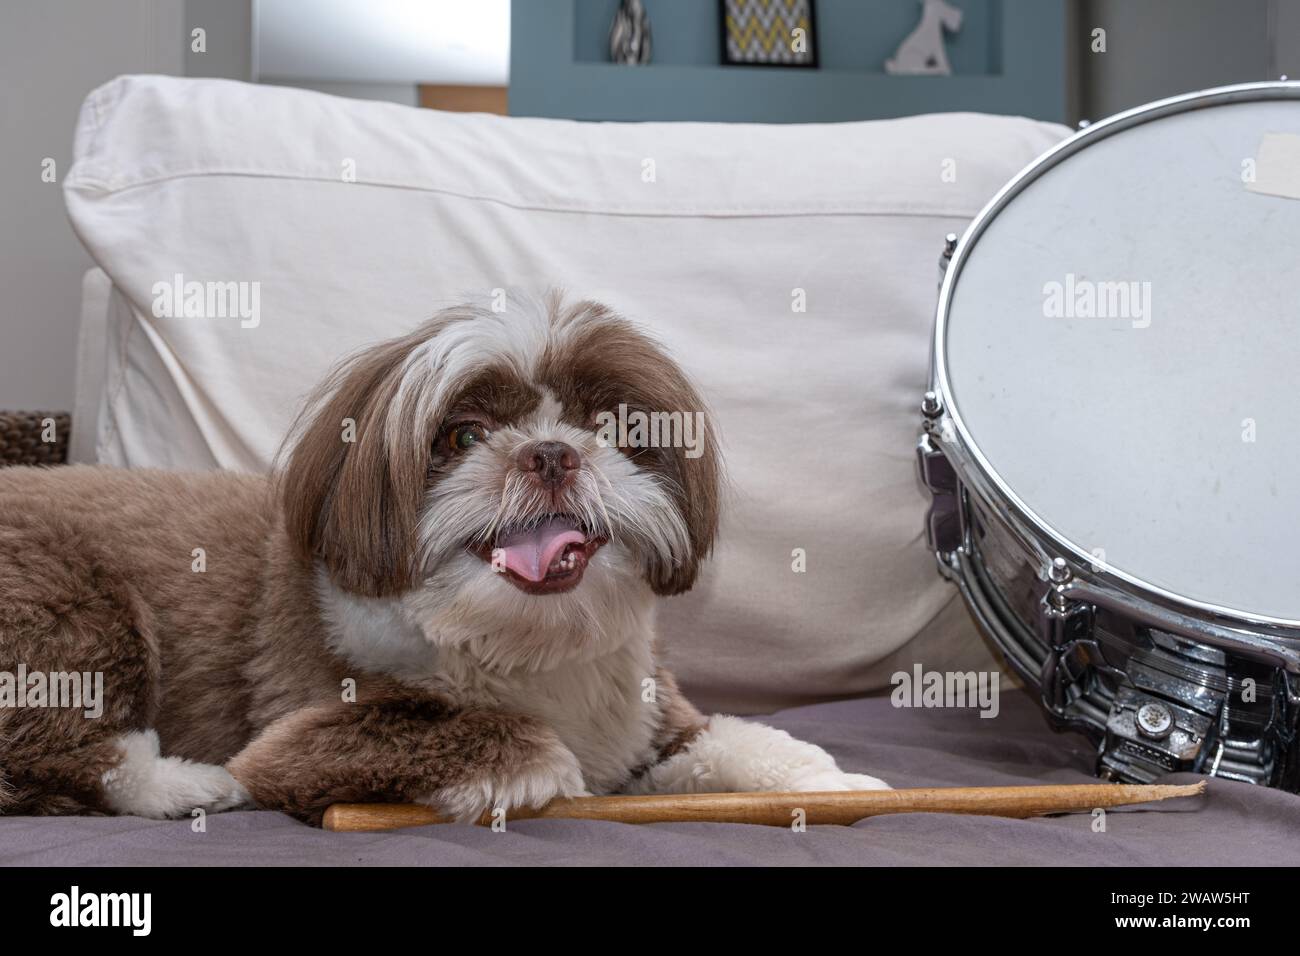 2 year old shih tzu with a tongue outside a drumstick and a metal snare 2. Stock Photo